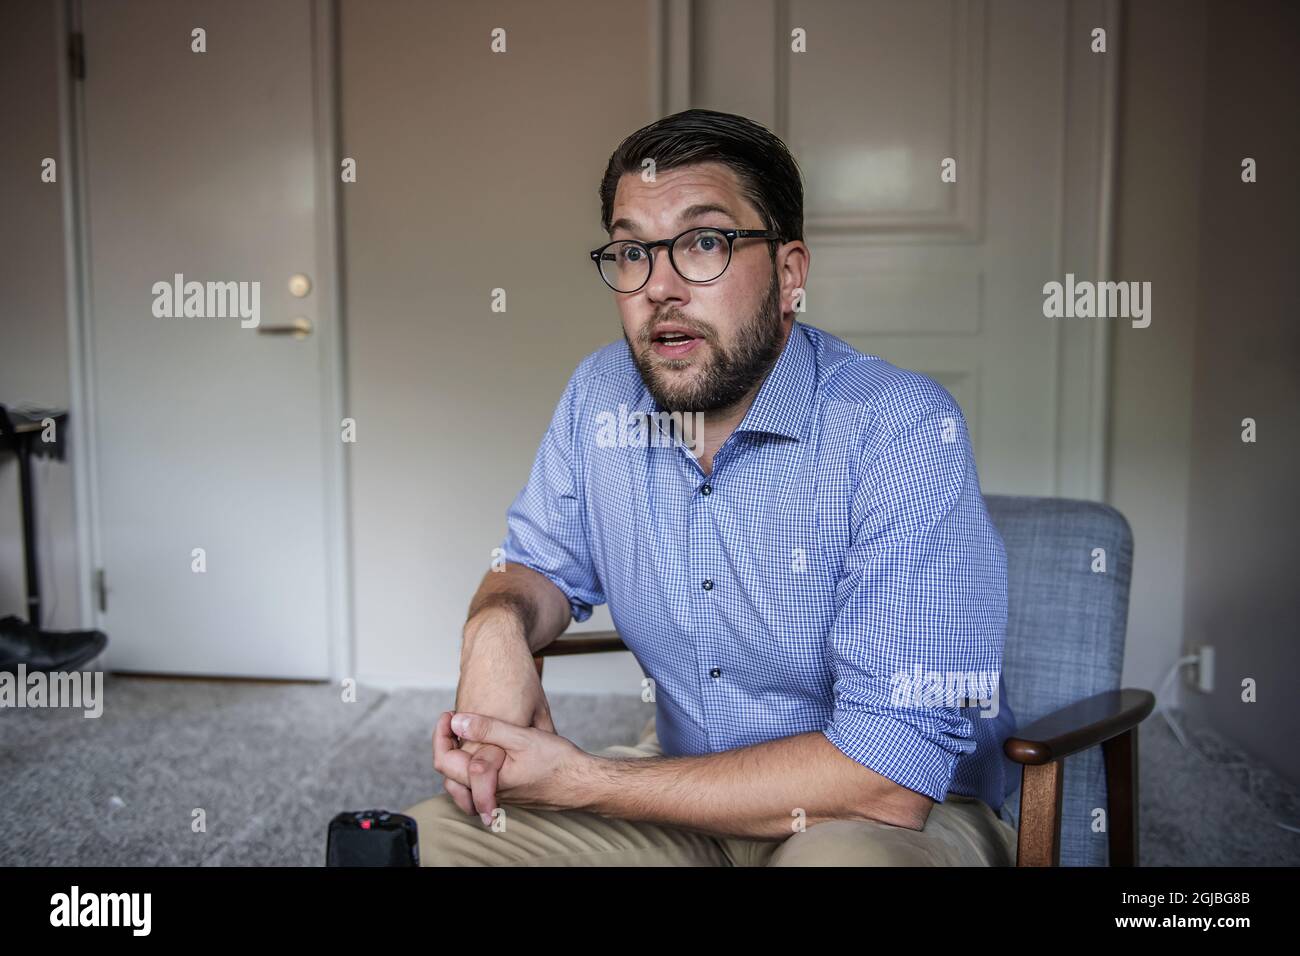 STOCKHOLM 2018-08-18 Jimmie Akesson, Chair of the Sweden Democrats during an interview before the general elections September 9, 2018. Foto: Anna-Karin Nilsson / EXP / TT / kod 7141 ** OUT SWEDEN OUT **  Stock Photo